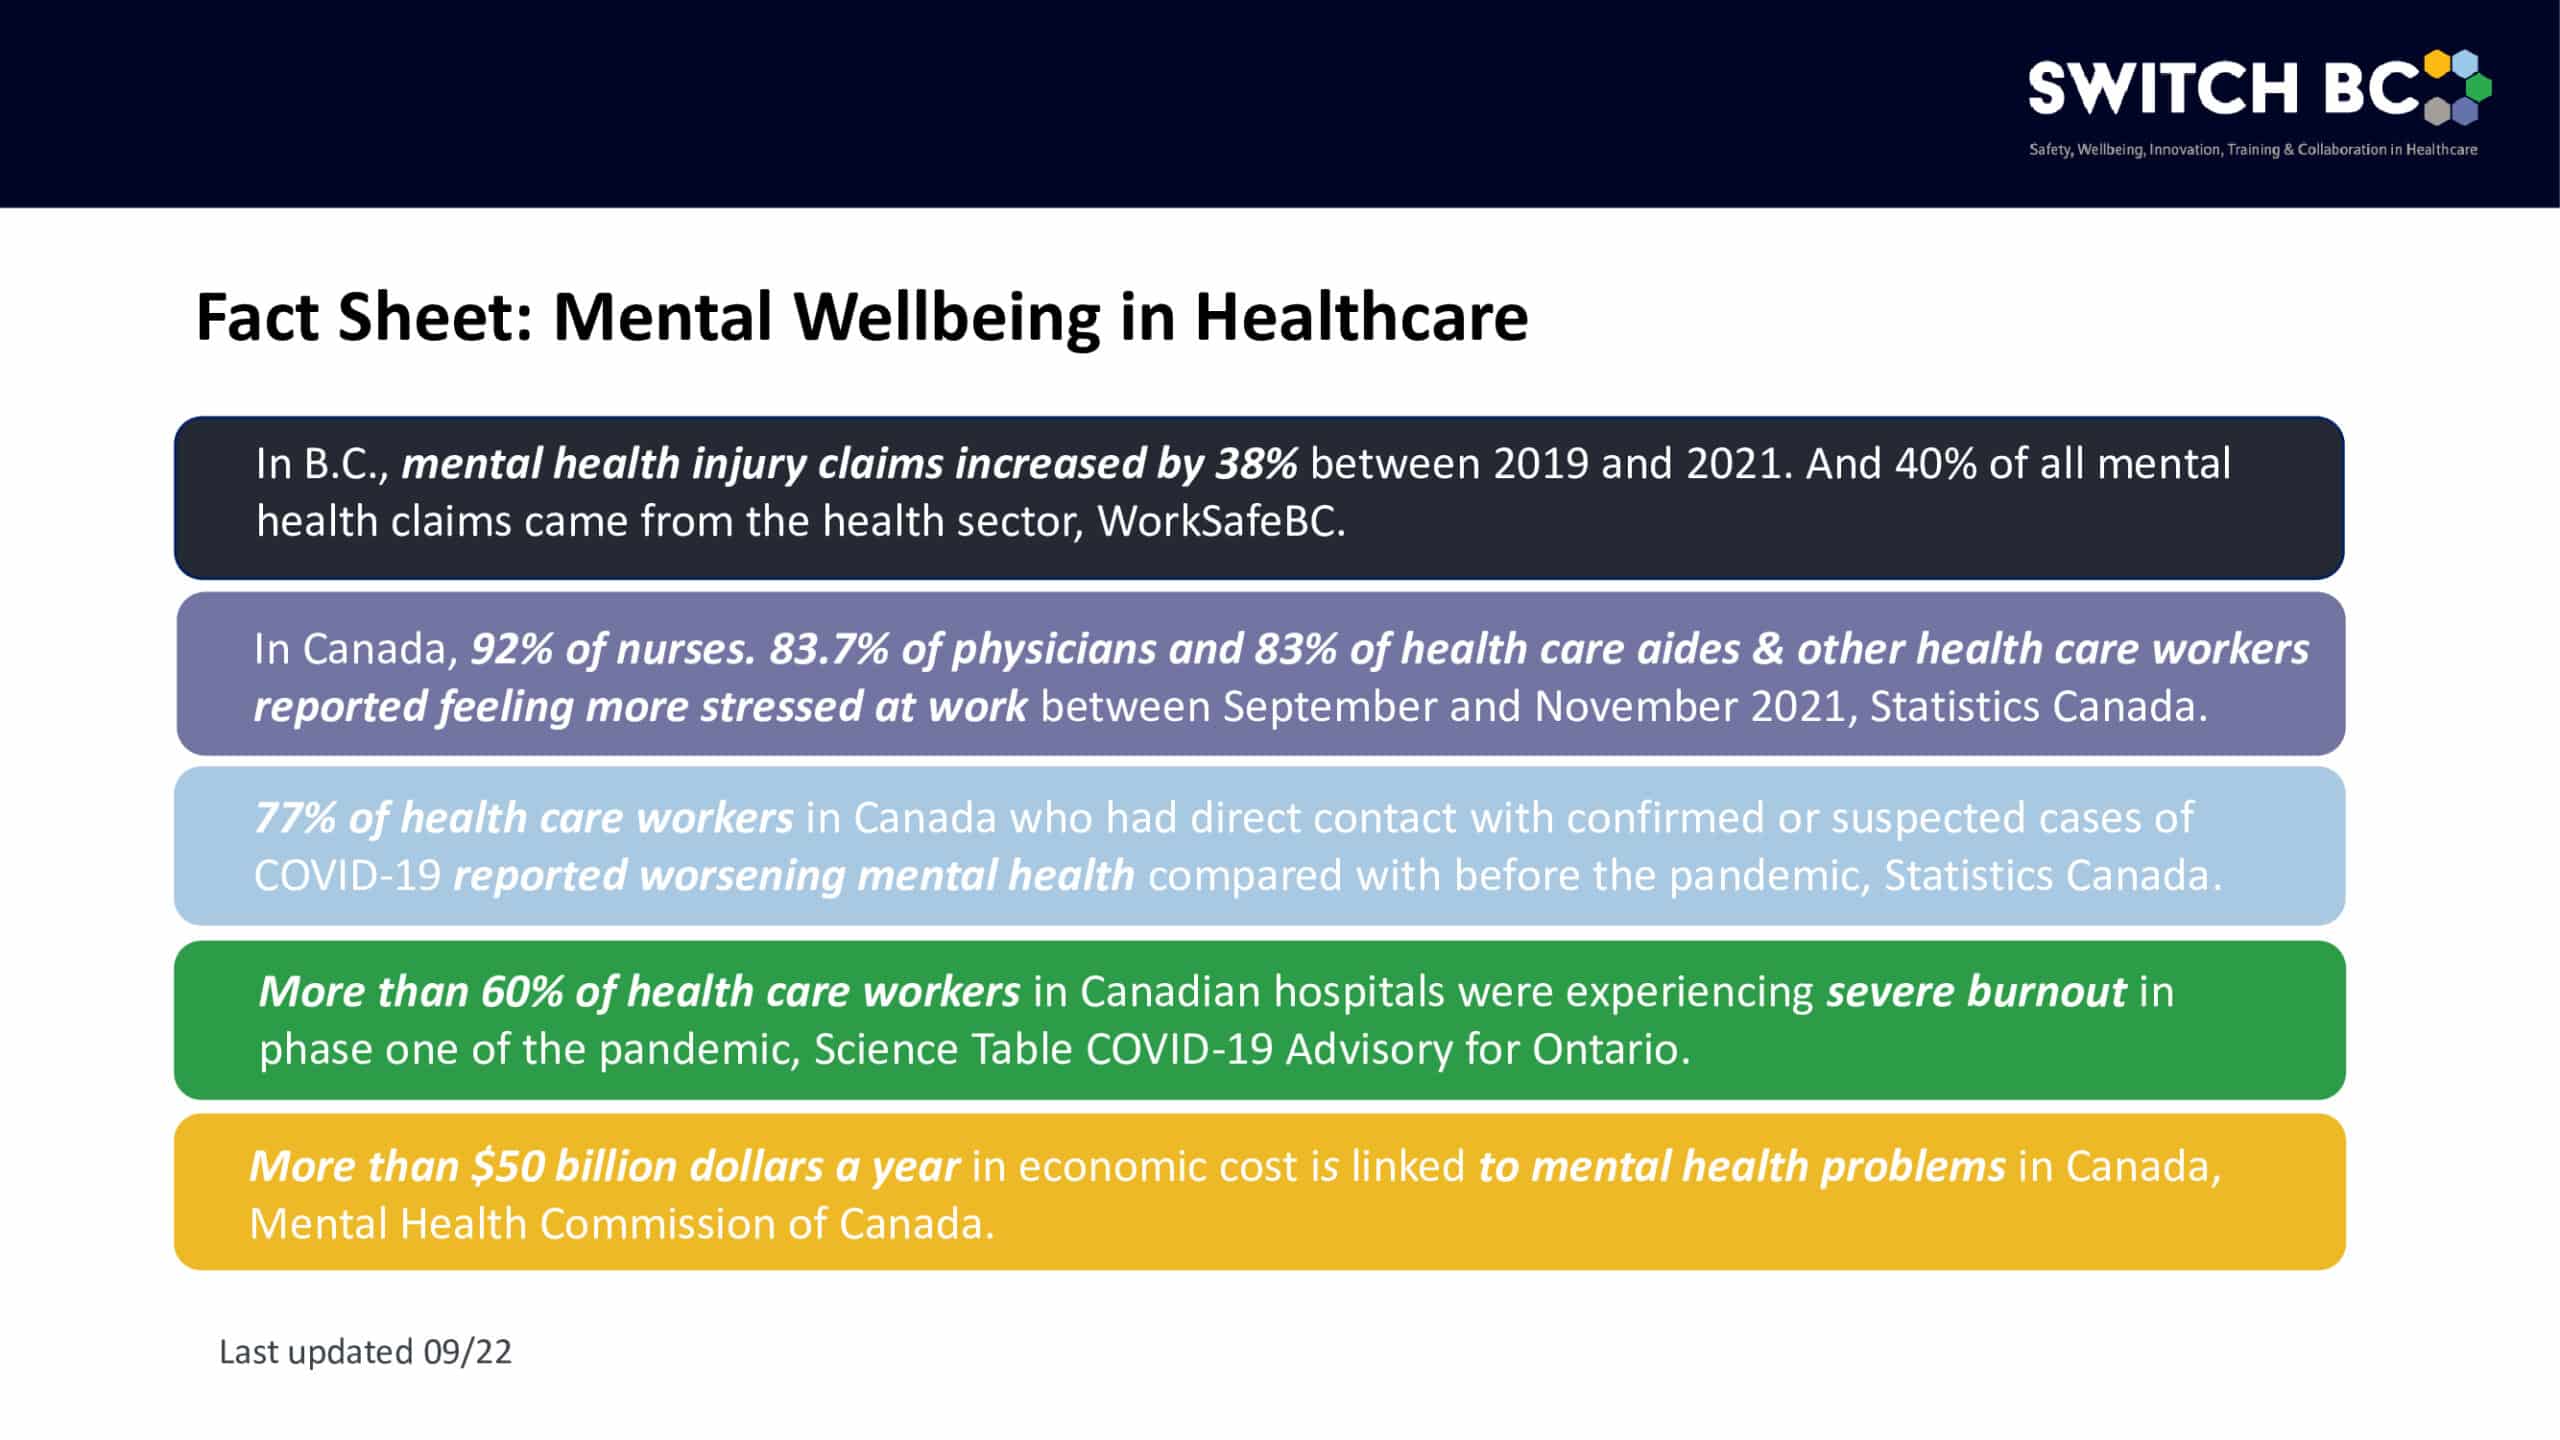 https://switchbc.ca/wp-content/uploads/2022/07/Mental-Wellbeing-fact-sheet-infographic-scaled.jpeg